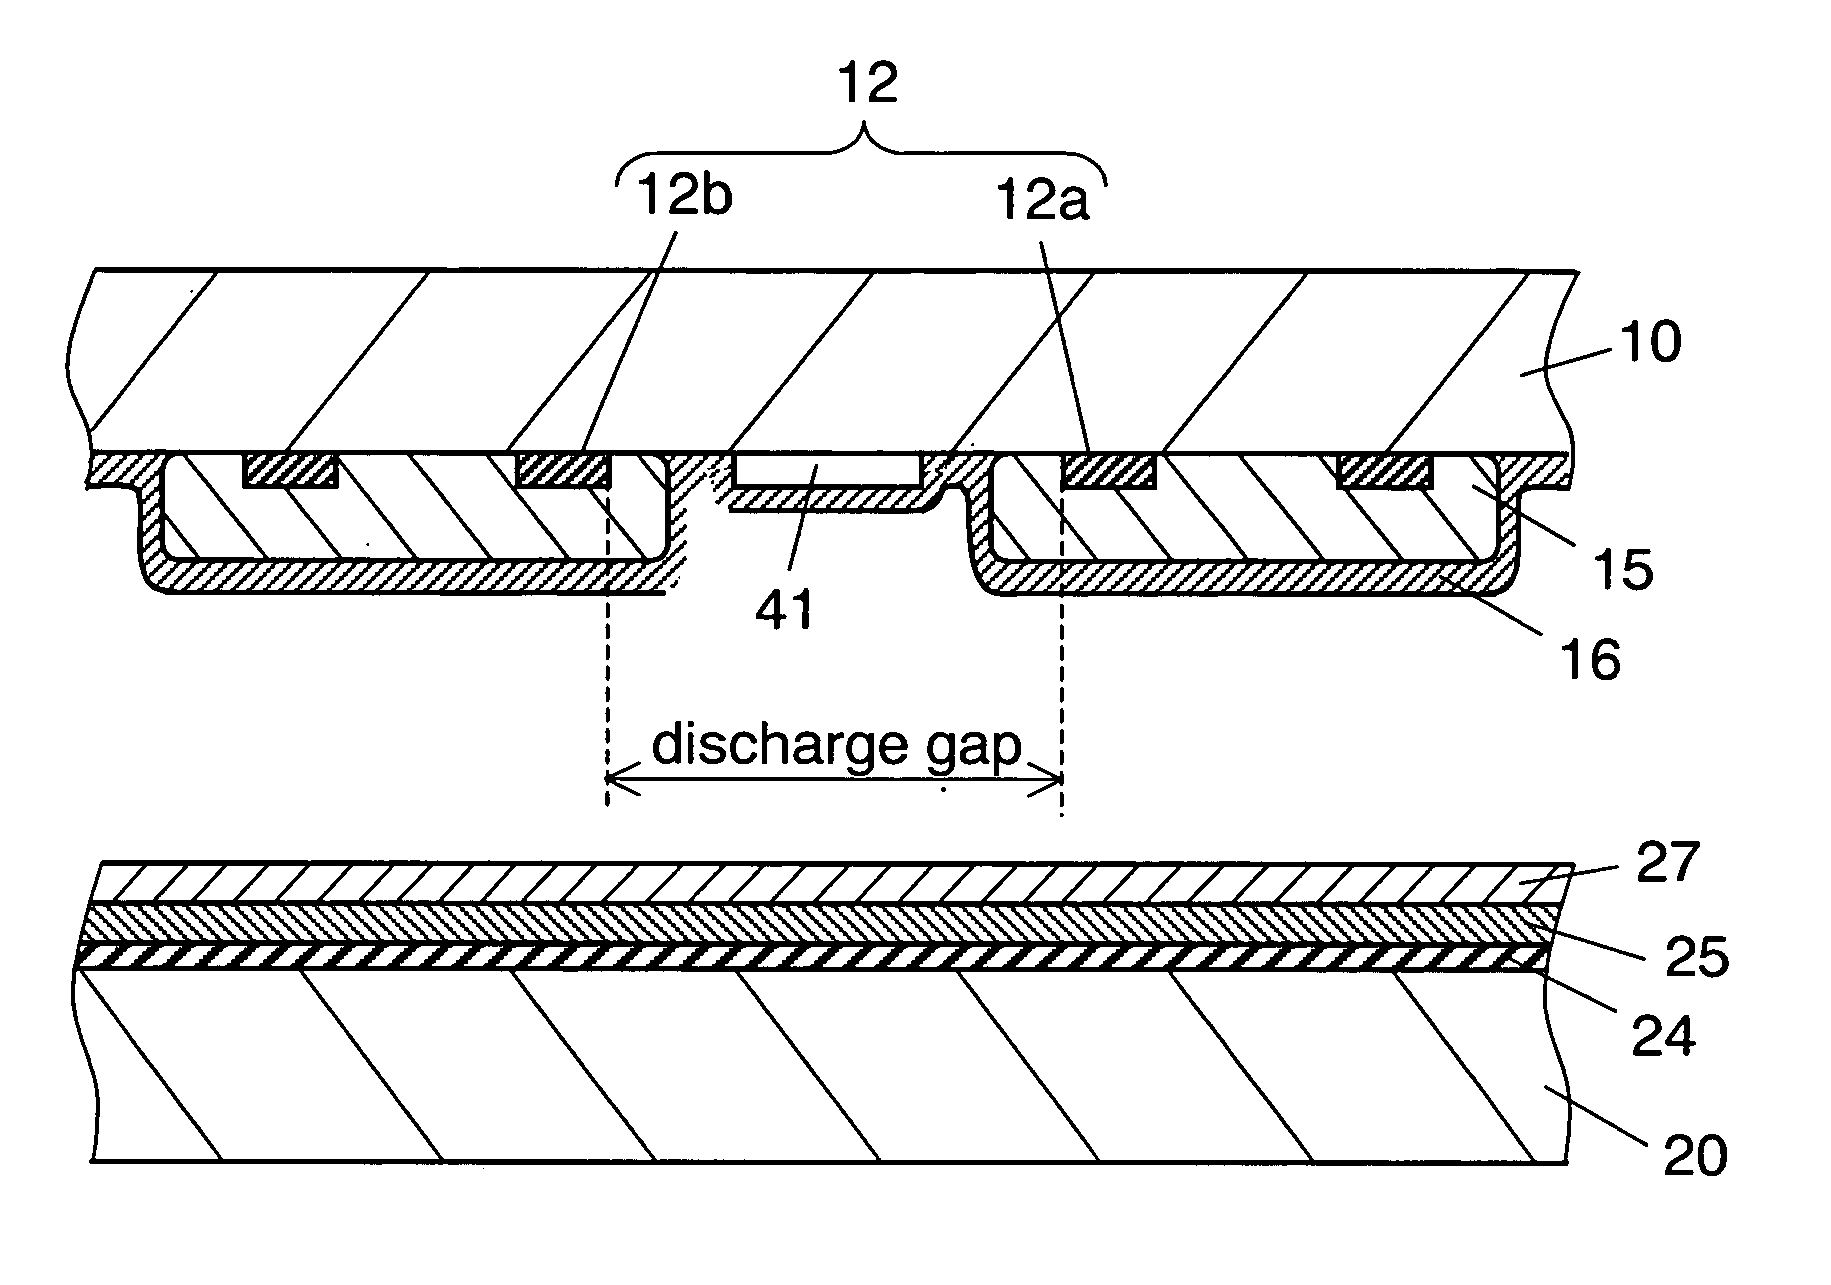 Plasma display panel including dielectric layer that does not cover part of a discharge gap